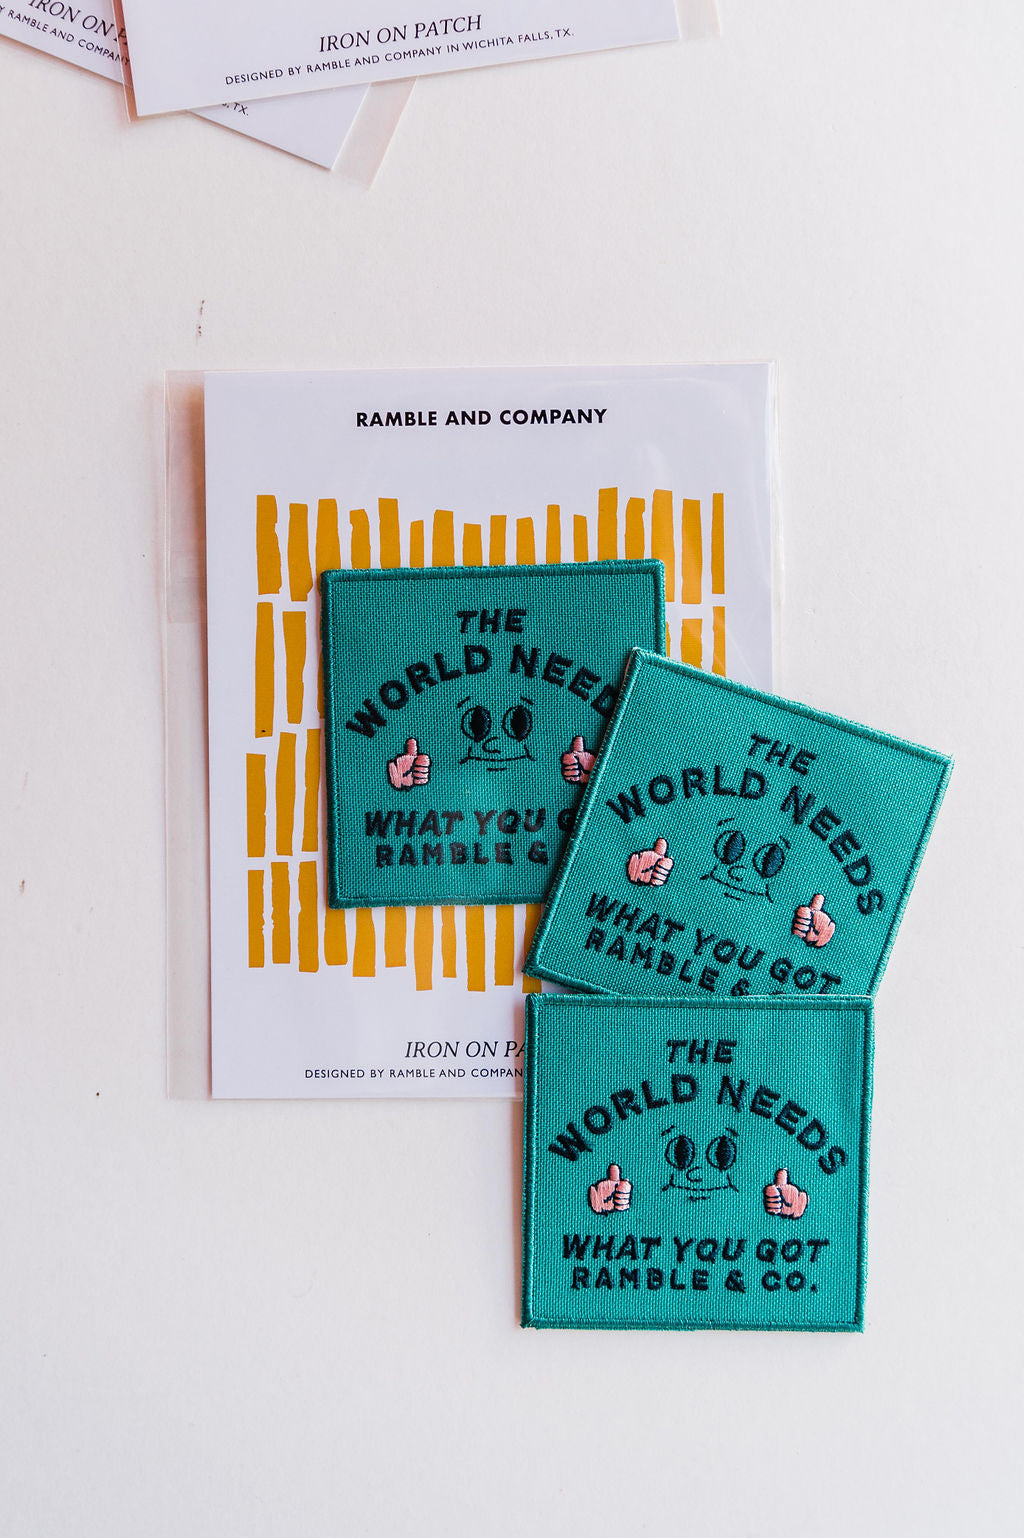 the design: the world needs what you got  the color: teal, black, and blush  approx. 2.5" x 2.5"  To apply:  Each patch is woven with an iron on backing. Hand stitching the patch around the edge will double ensure the longevity of the patch placement. Ramble & Co. is a family owned business. Shop at shop.rambleandcompany.com or visit our store in Wichita Falls, Texas || small batch/ hand printed tees + fine art prints | your source of encouragement + inspiration.